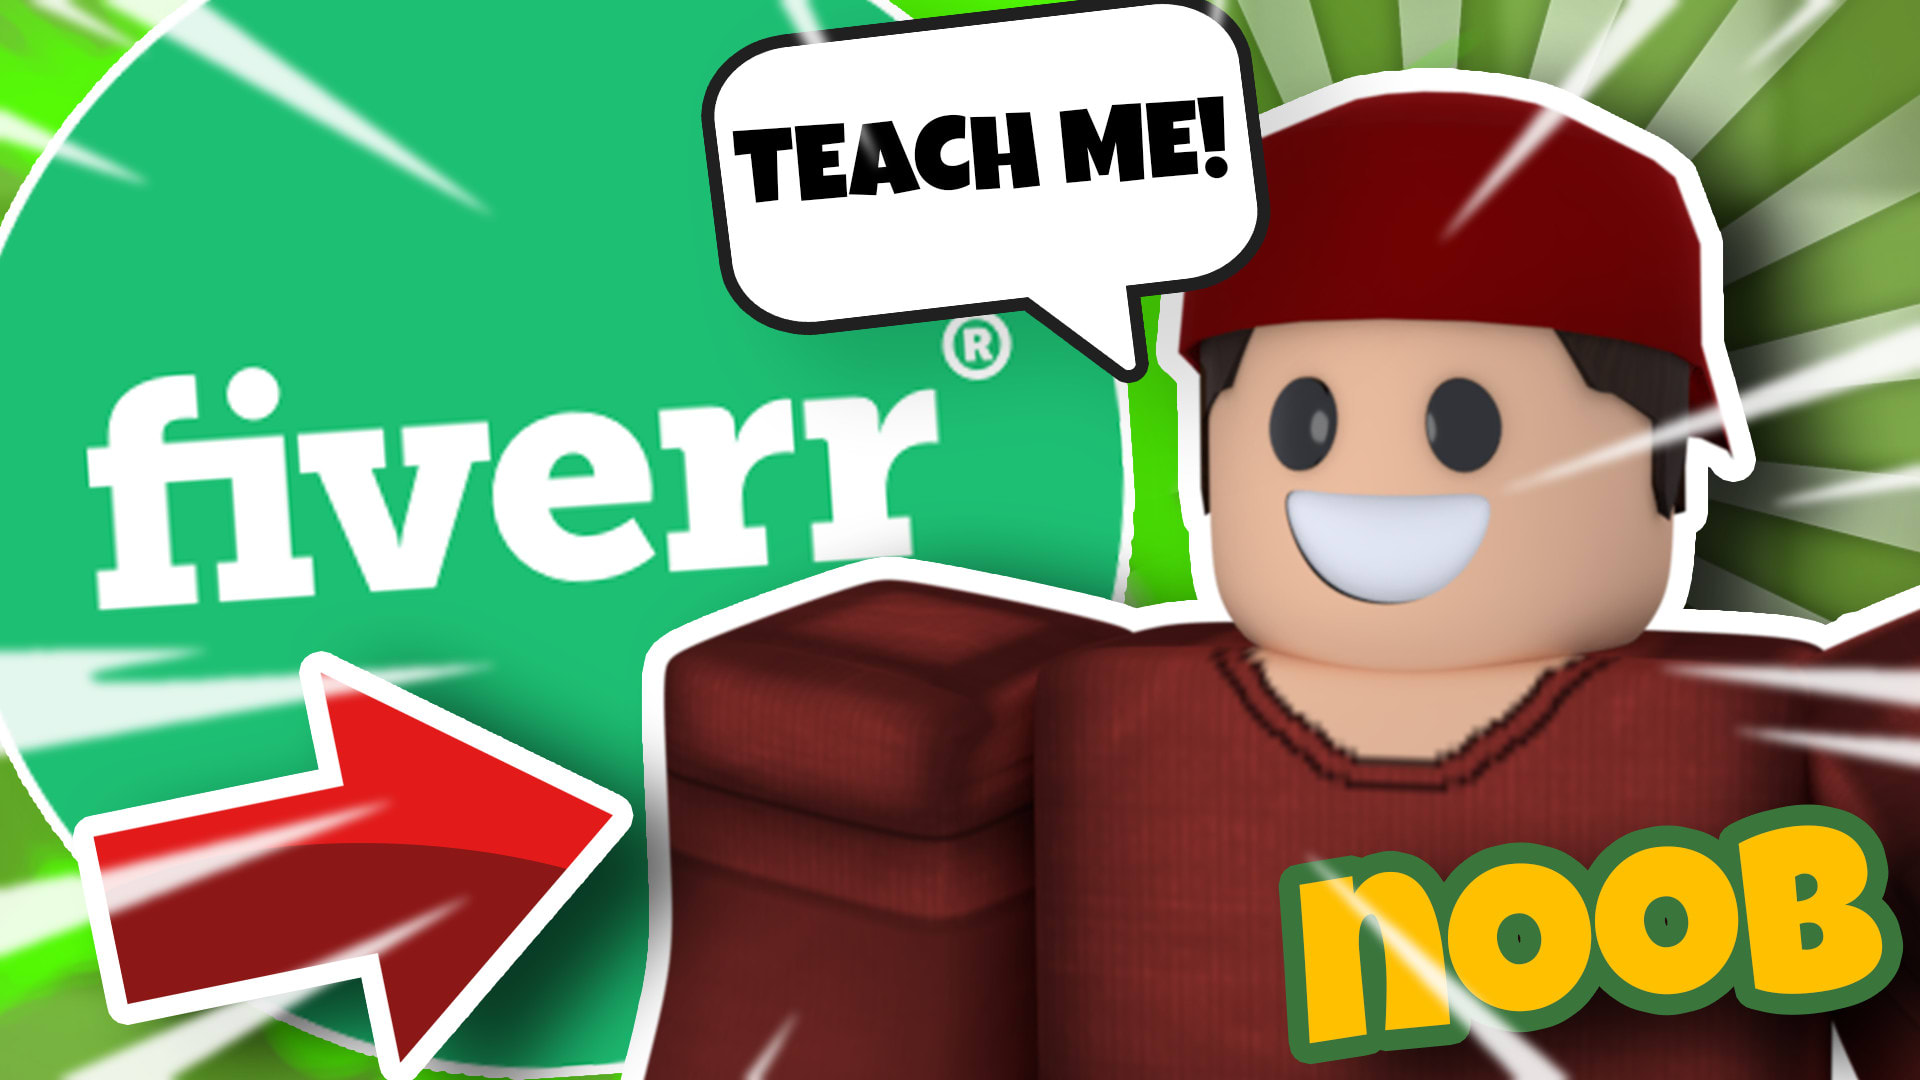 Coach You In Roblox Arsenal By Jymbowslice - logo arsenal roblox wallpaper